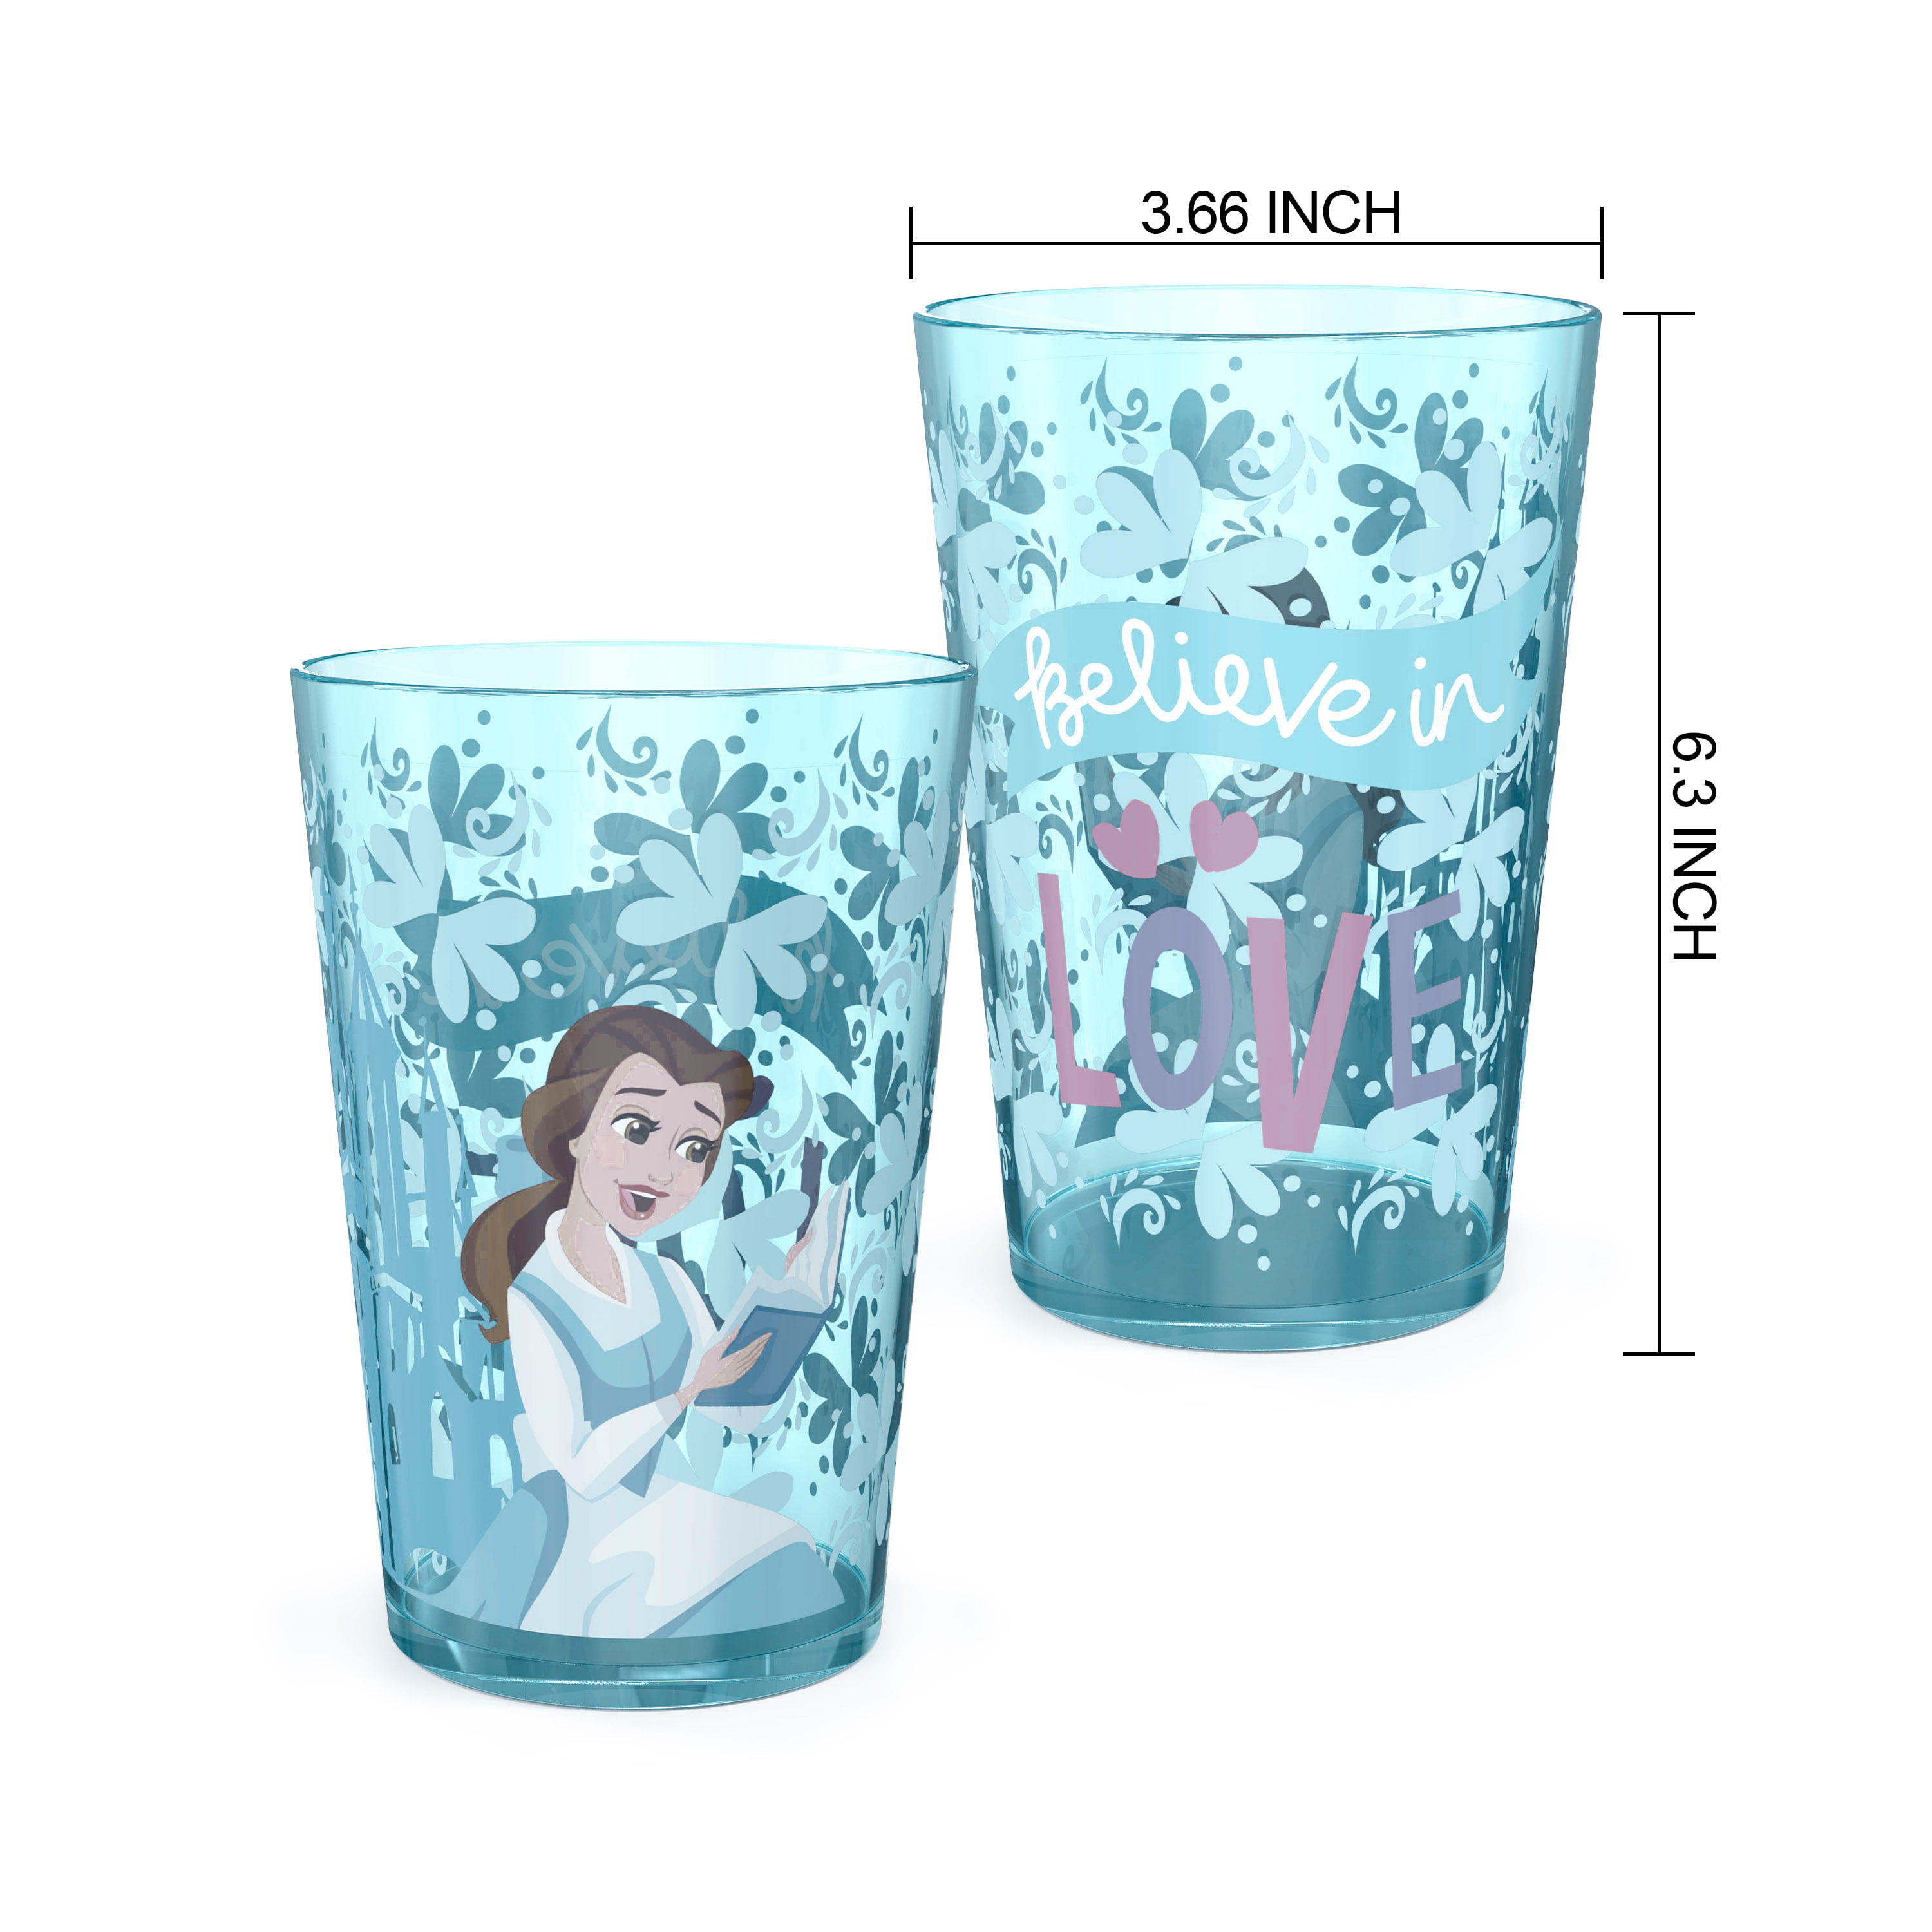  Zak Designs Bluey Nesting Tumbler Set Includes Durable Plastic  Cups with Variety Artwork, Fun Drinkware is Perfect for Kids (14.5 oz,  4-Pack, Non-BPA) : Everything Else